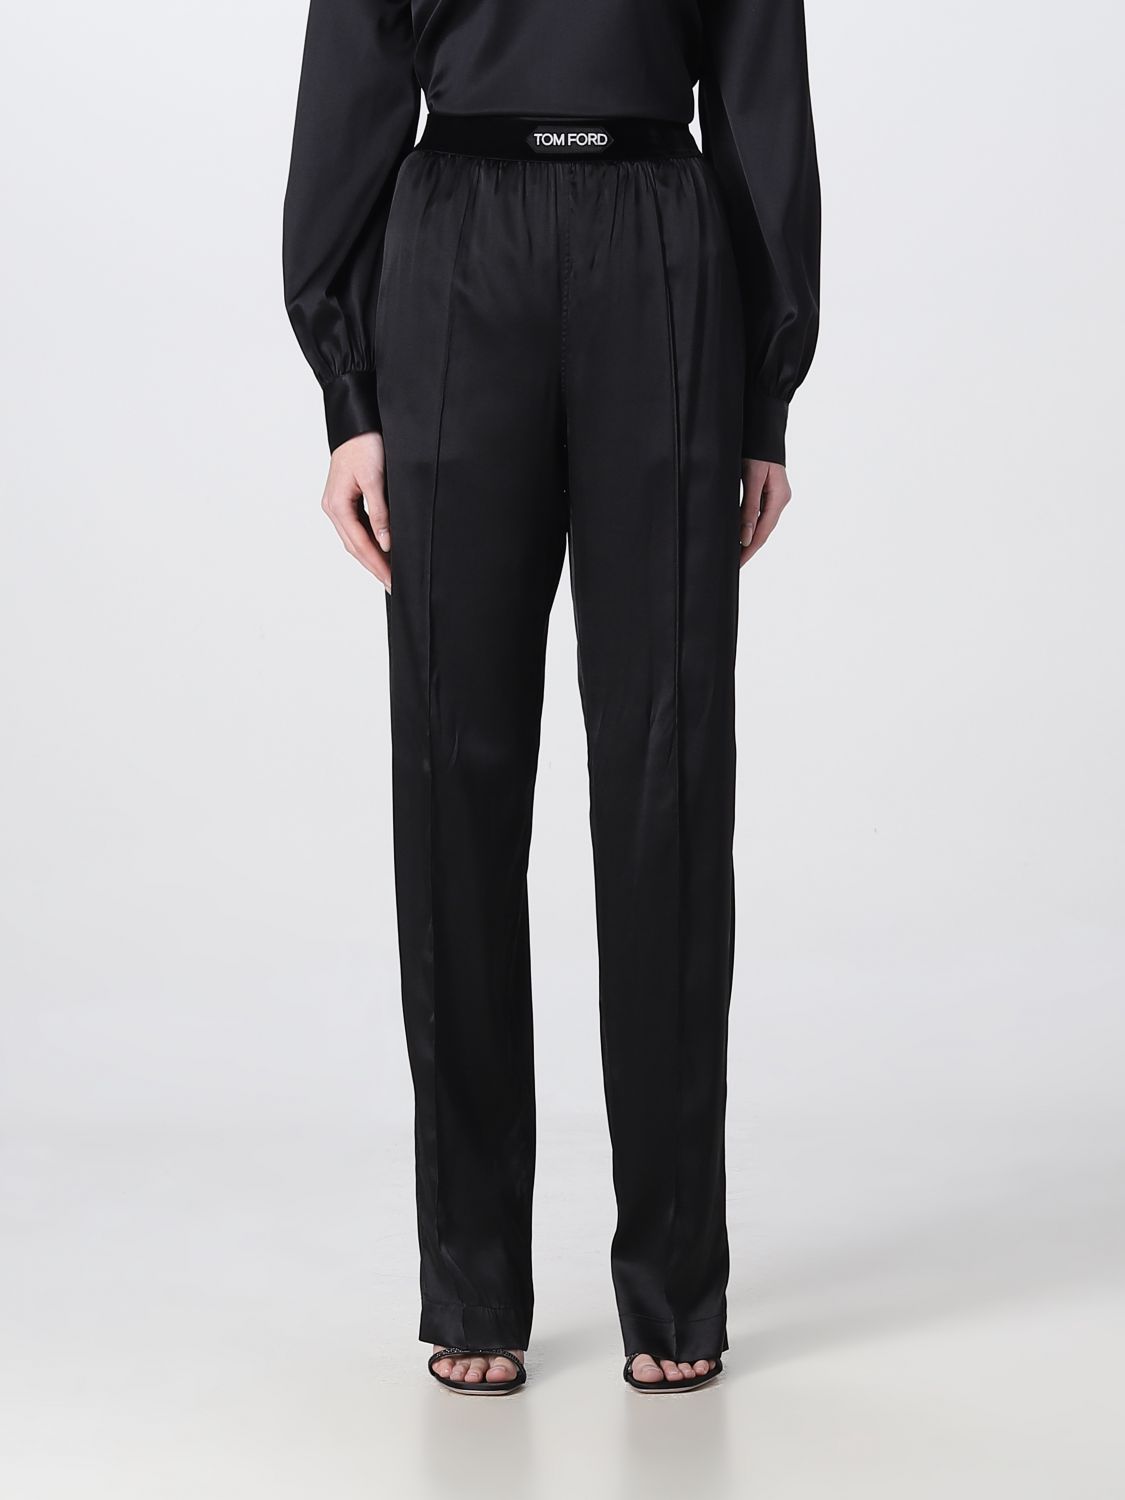 TOM FORD TROUSERS TOM FORD WOMAN,D81131002